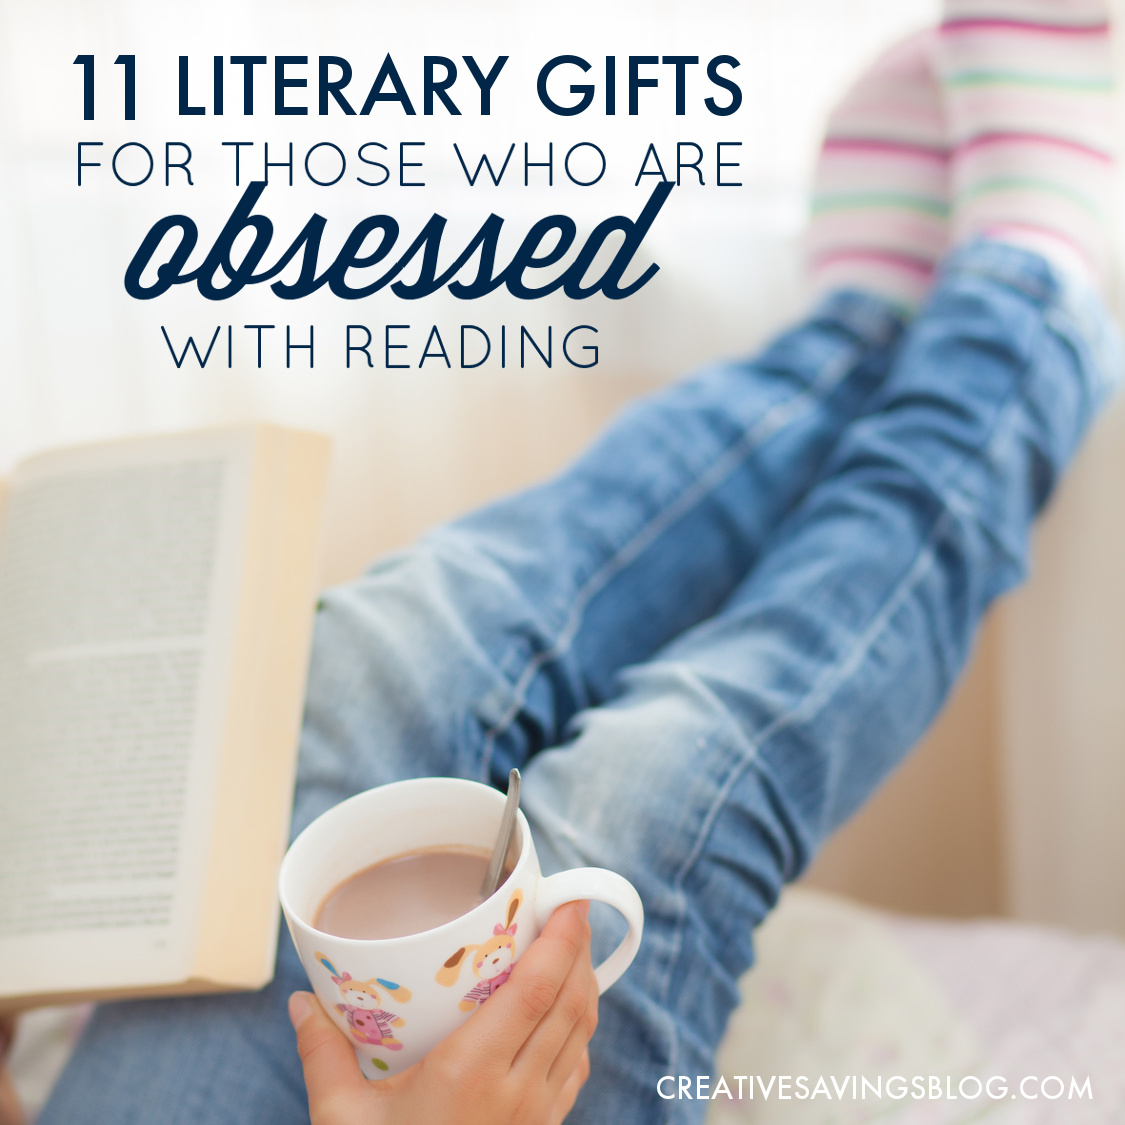 11 Literary Gifts for Those Who Are Obsessed With Reading